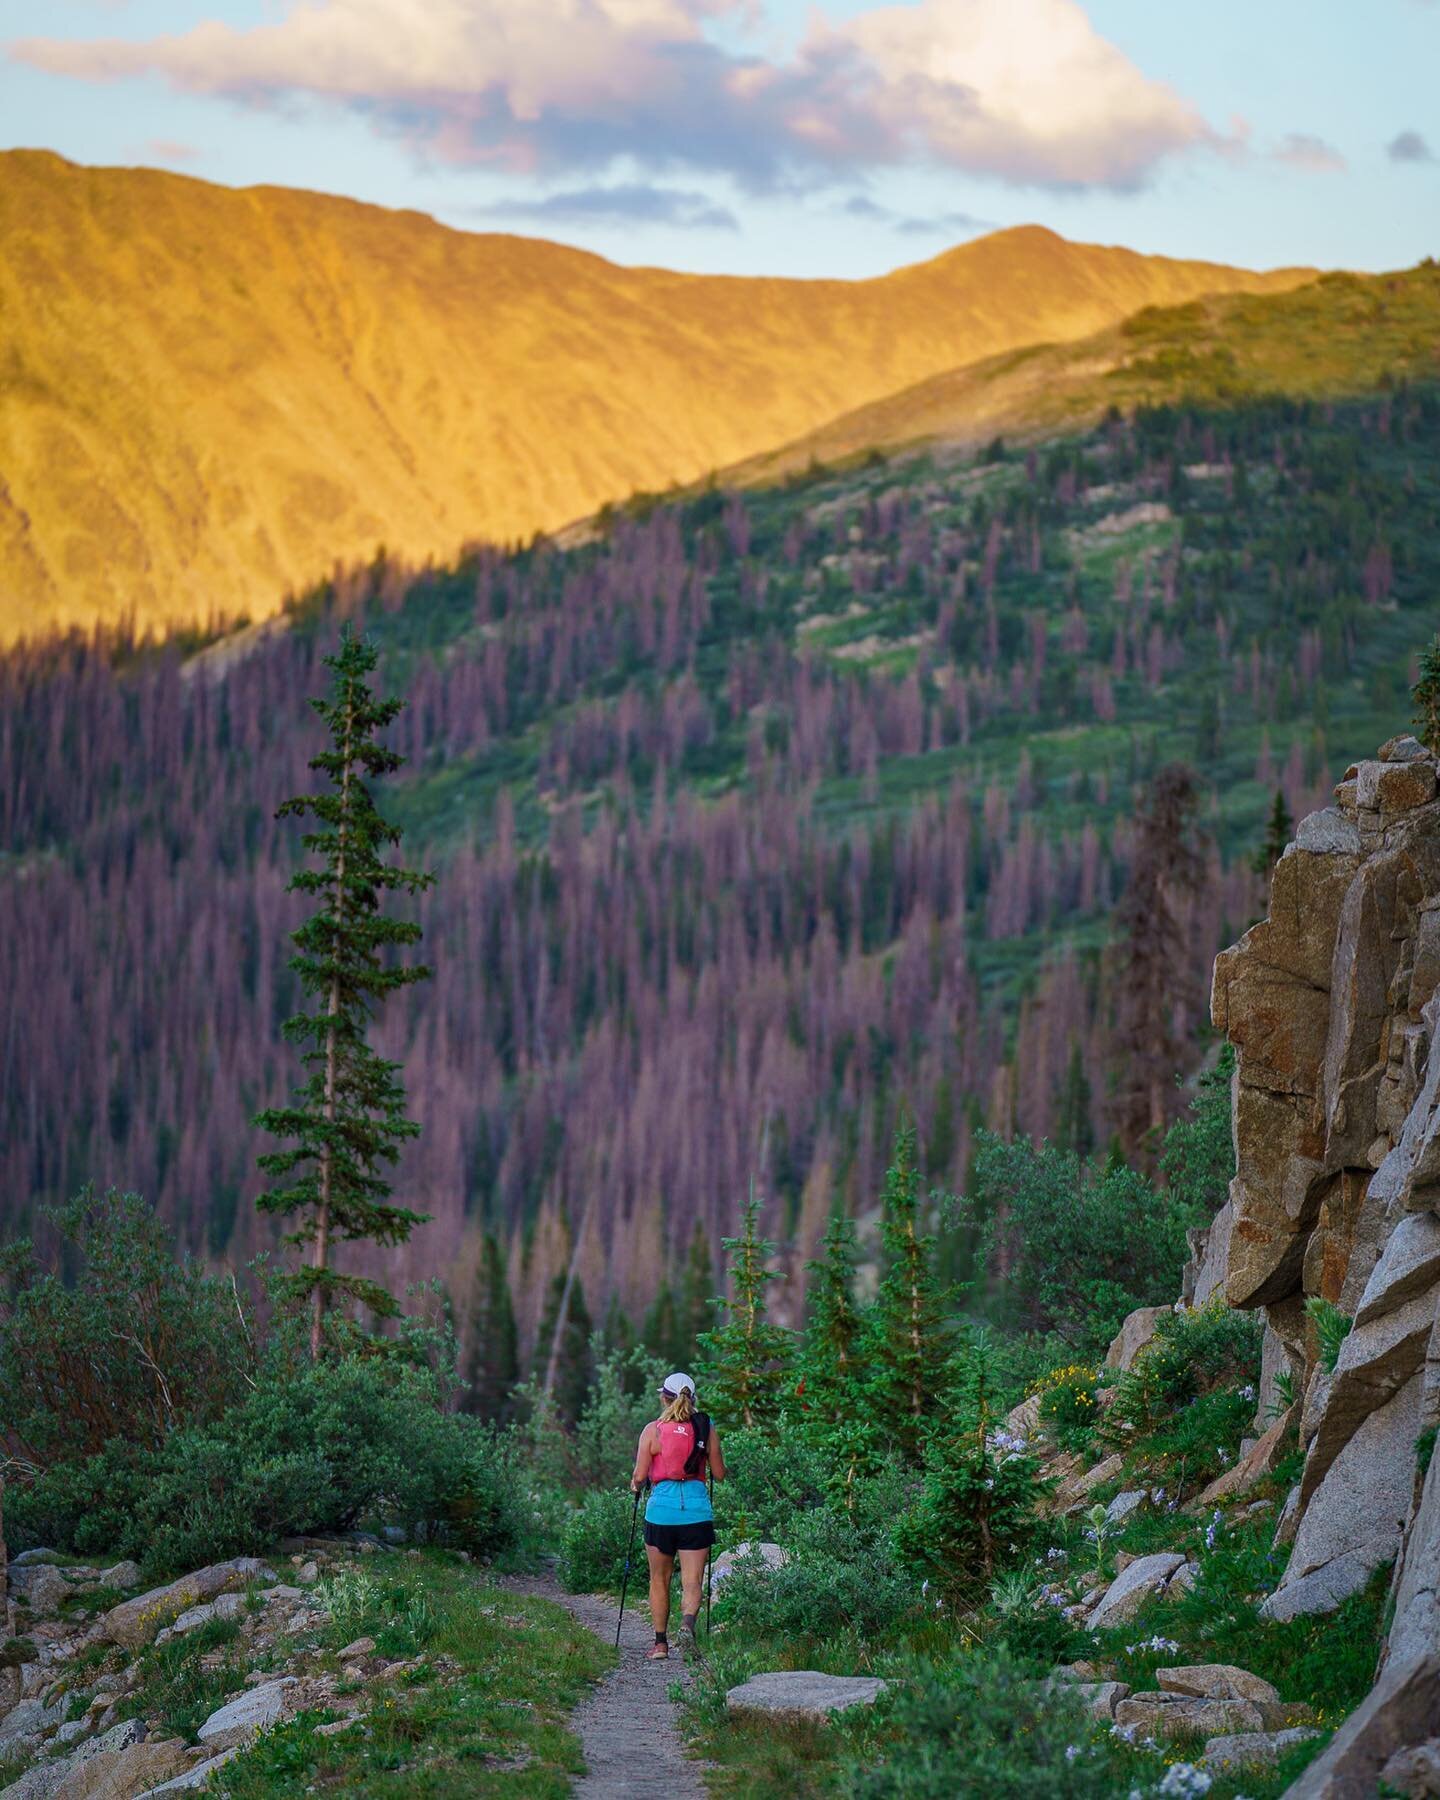 July ended with another fantastic year shooting the @highlonesome100 with @mile90 . It's hard to beat following dedicated runners through 100 miles of Colorado high country. Start to finish one of the best weekends of the year.